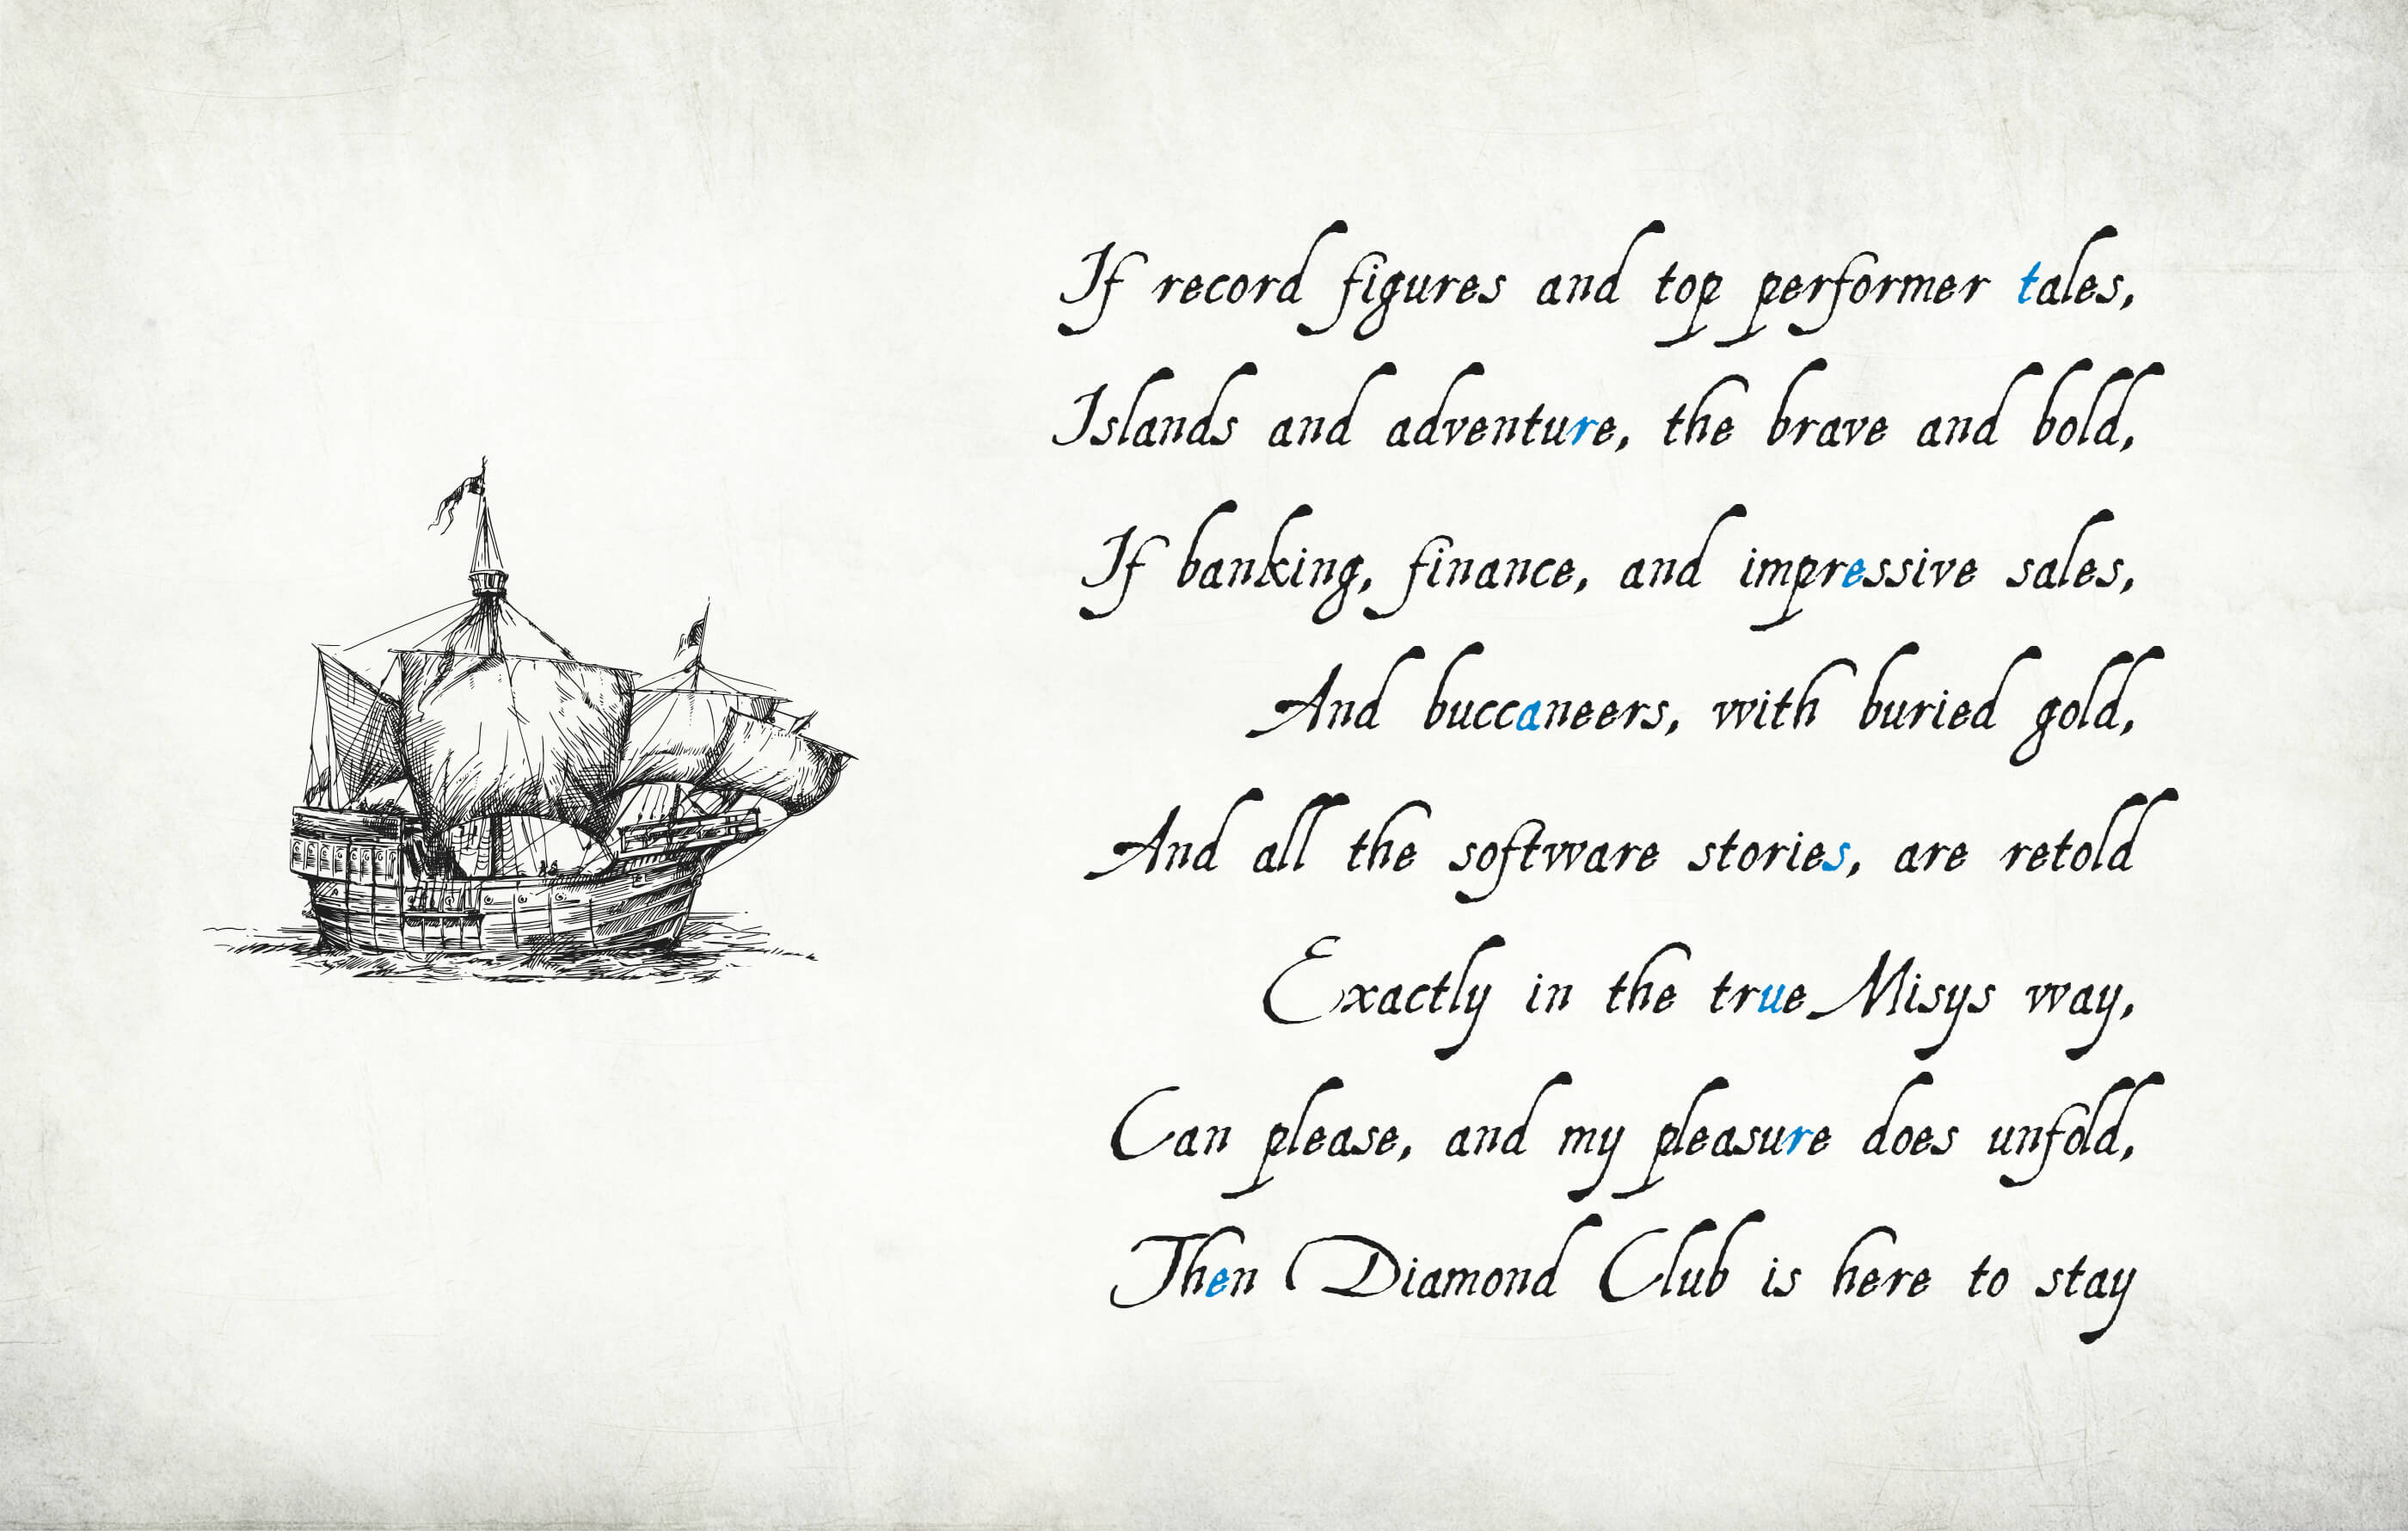 Page extract from the hardback book, featuring a rough hand-drawn illustration of a pirate ship next to a Diamond Club poem which reveals clues to a secret password